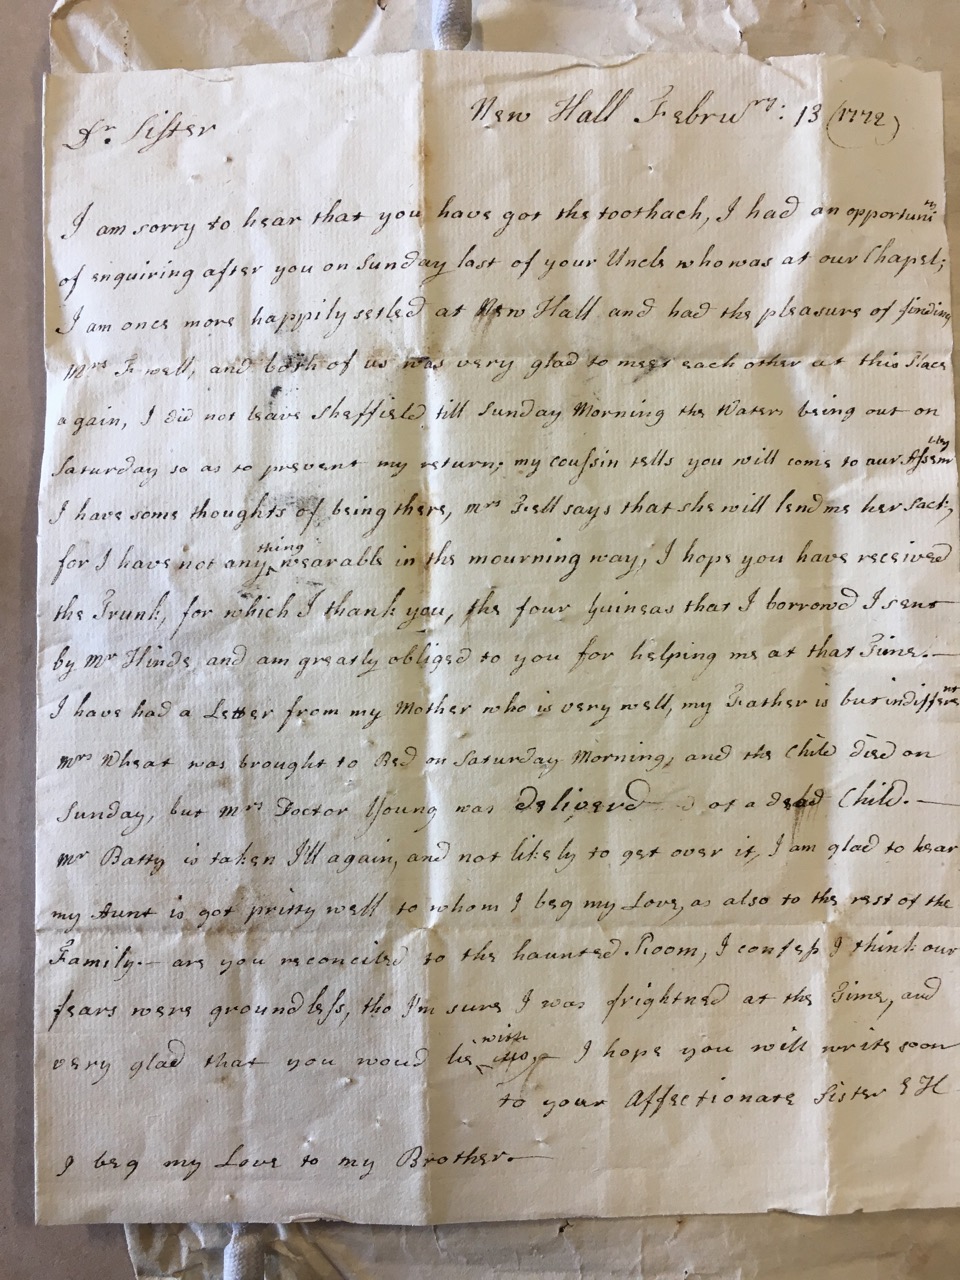 Image #1 of letter: Elizabeth Hare to Ann Hare, 13 February 1772